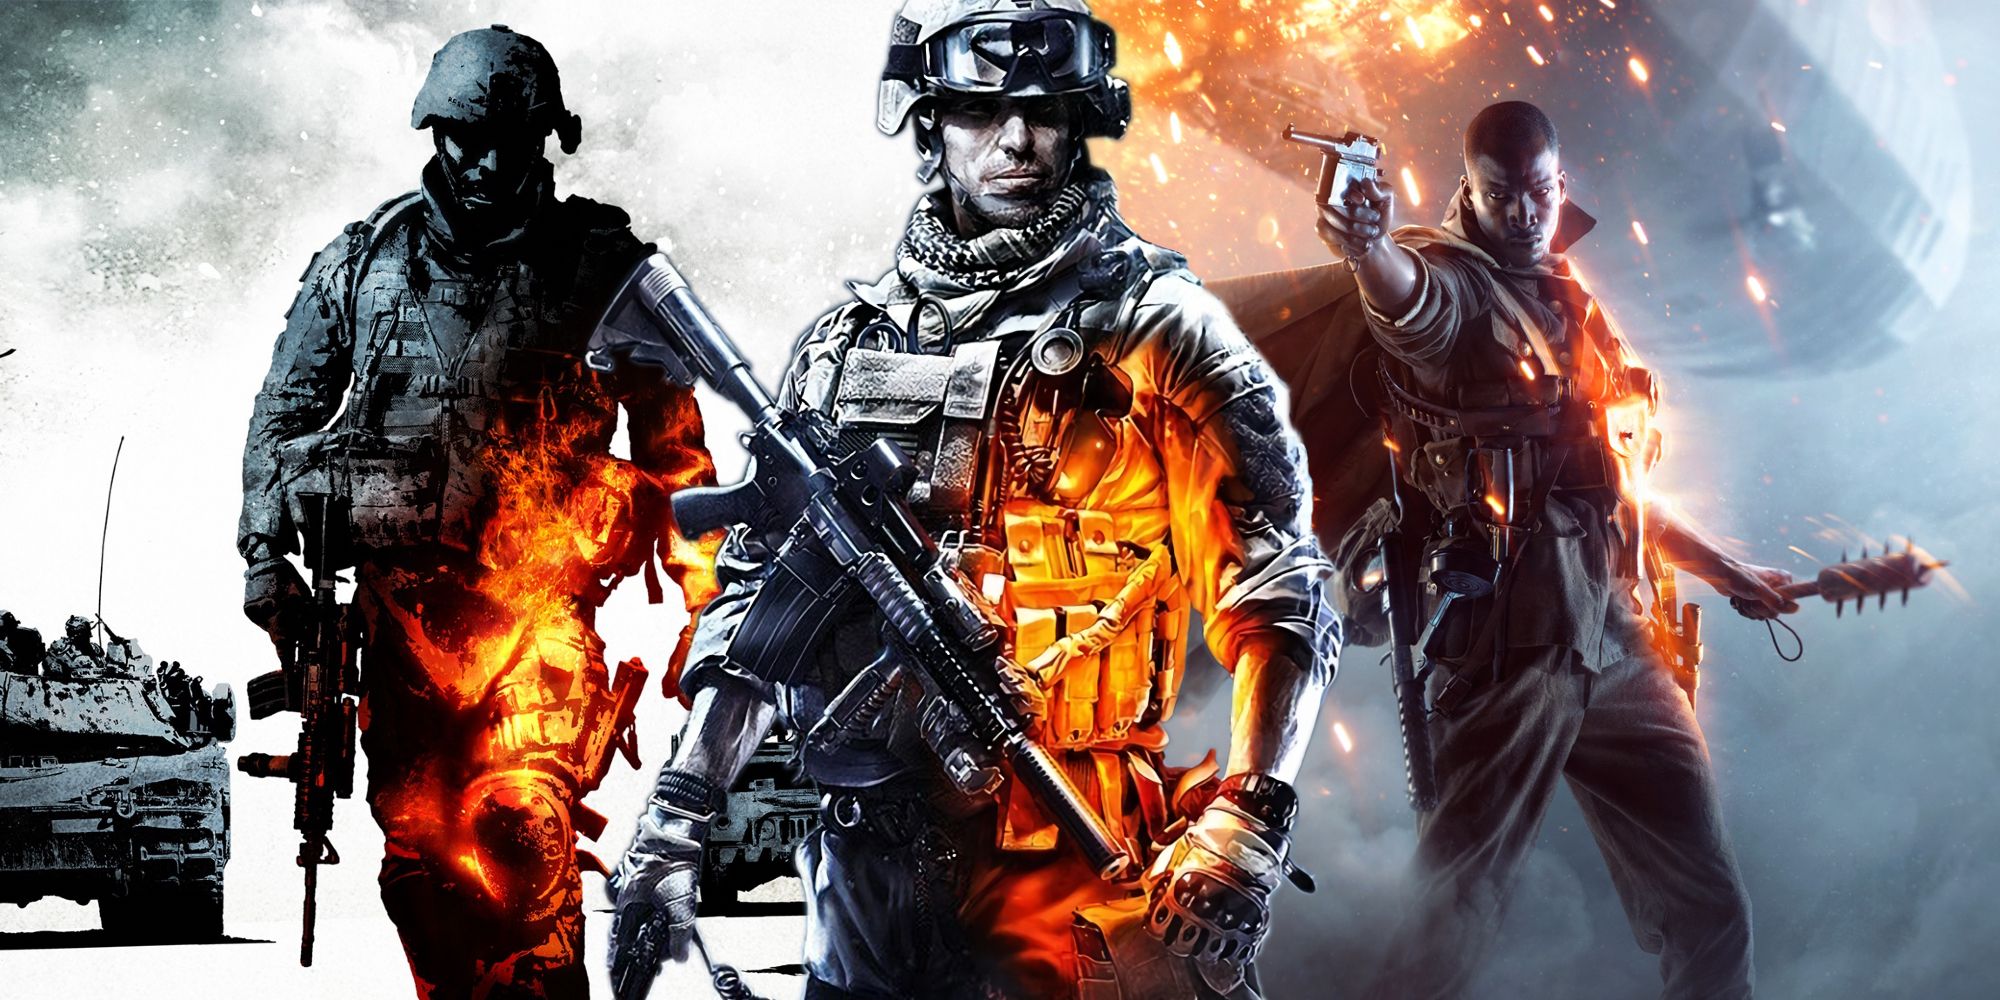 The cover arts for Battlefield: Bad Company 2 and Battlefield 1 behind the cover soldier from Battlefield 3.